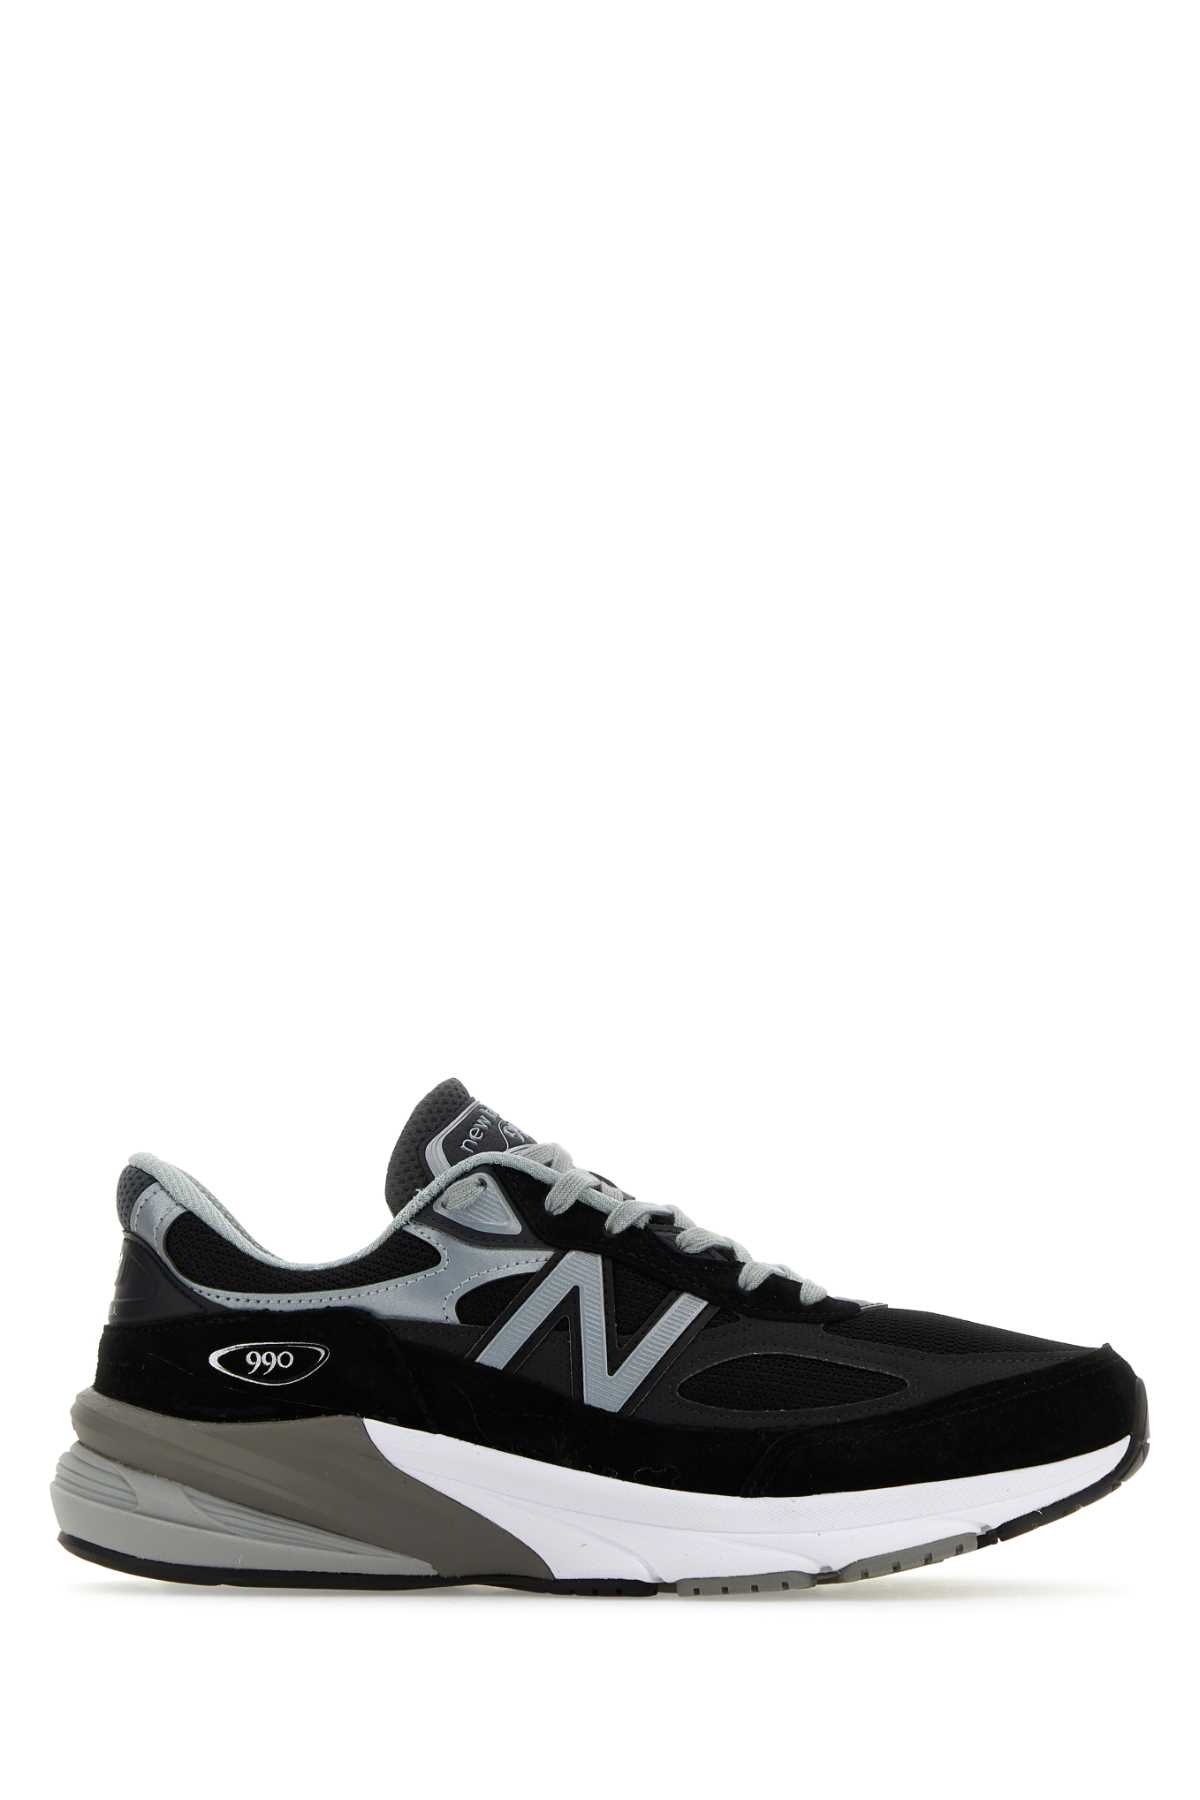 Shop New Balance Multicolor Fabric And Suede 990v6 Sneakers In Black